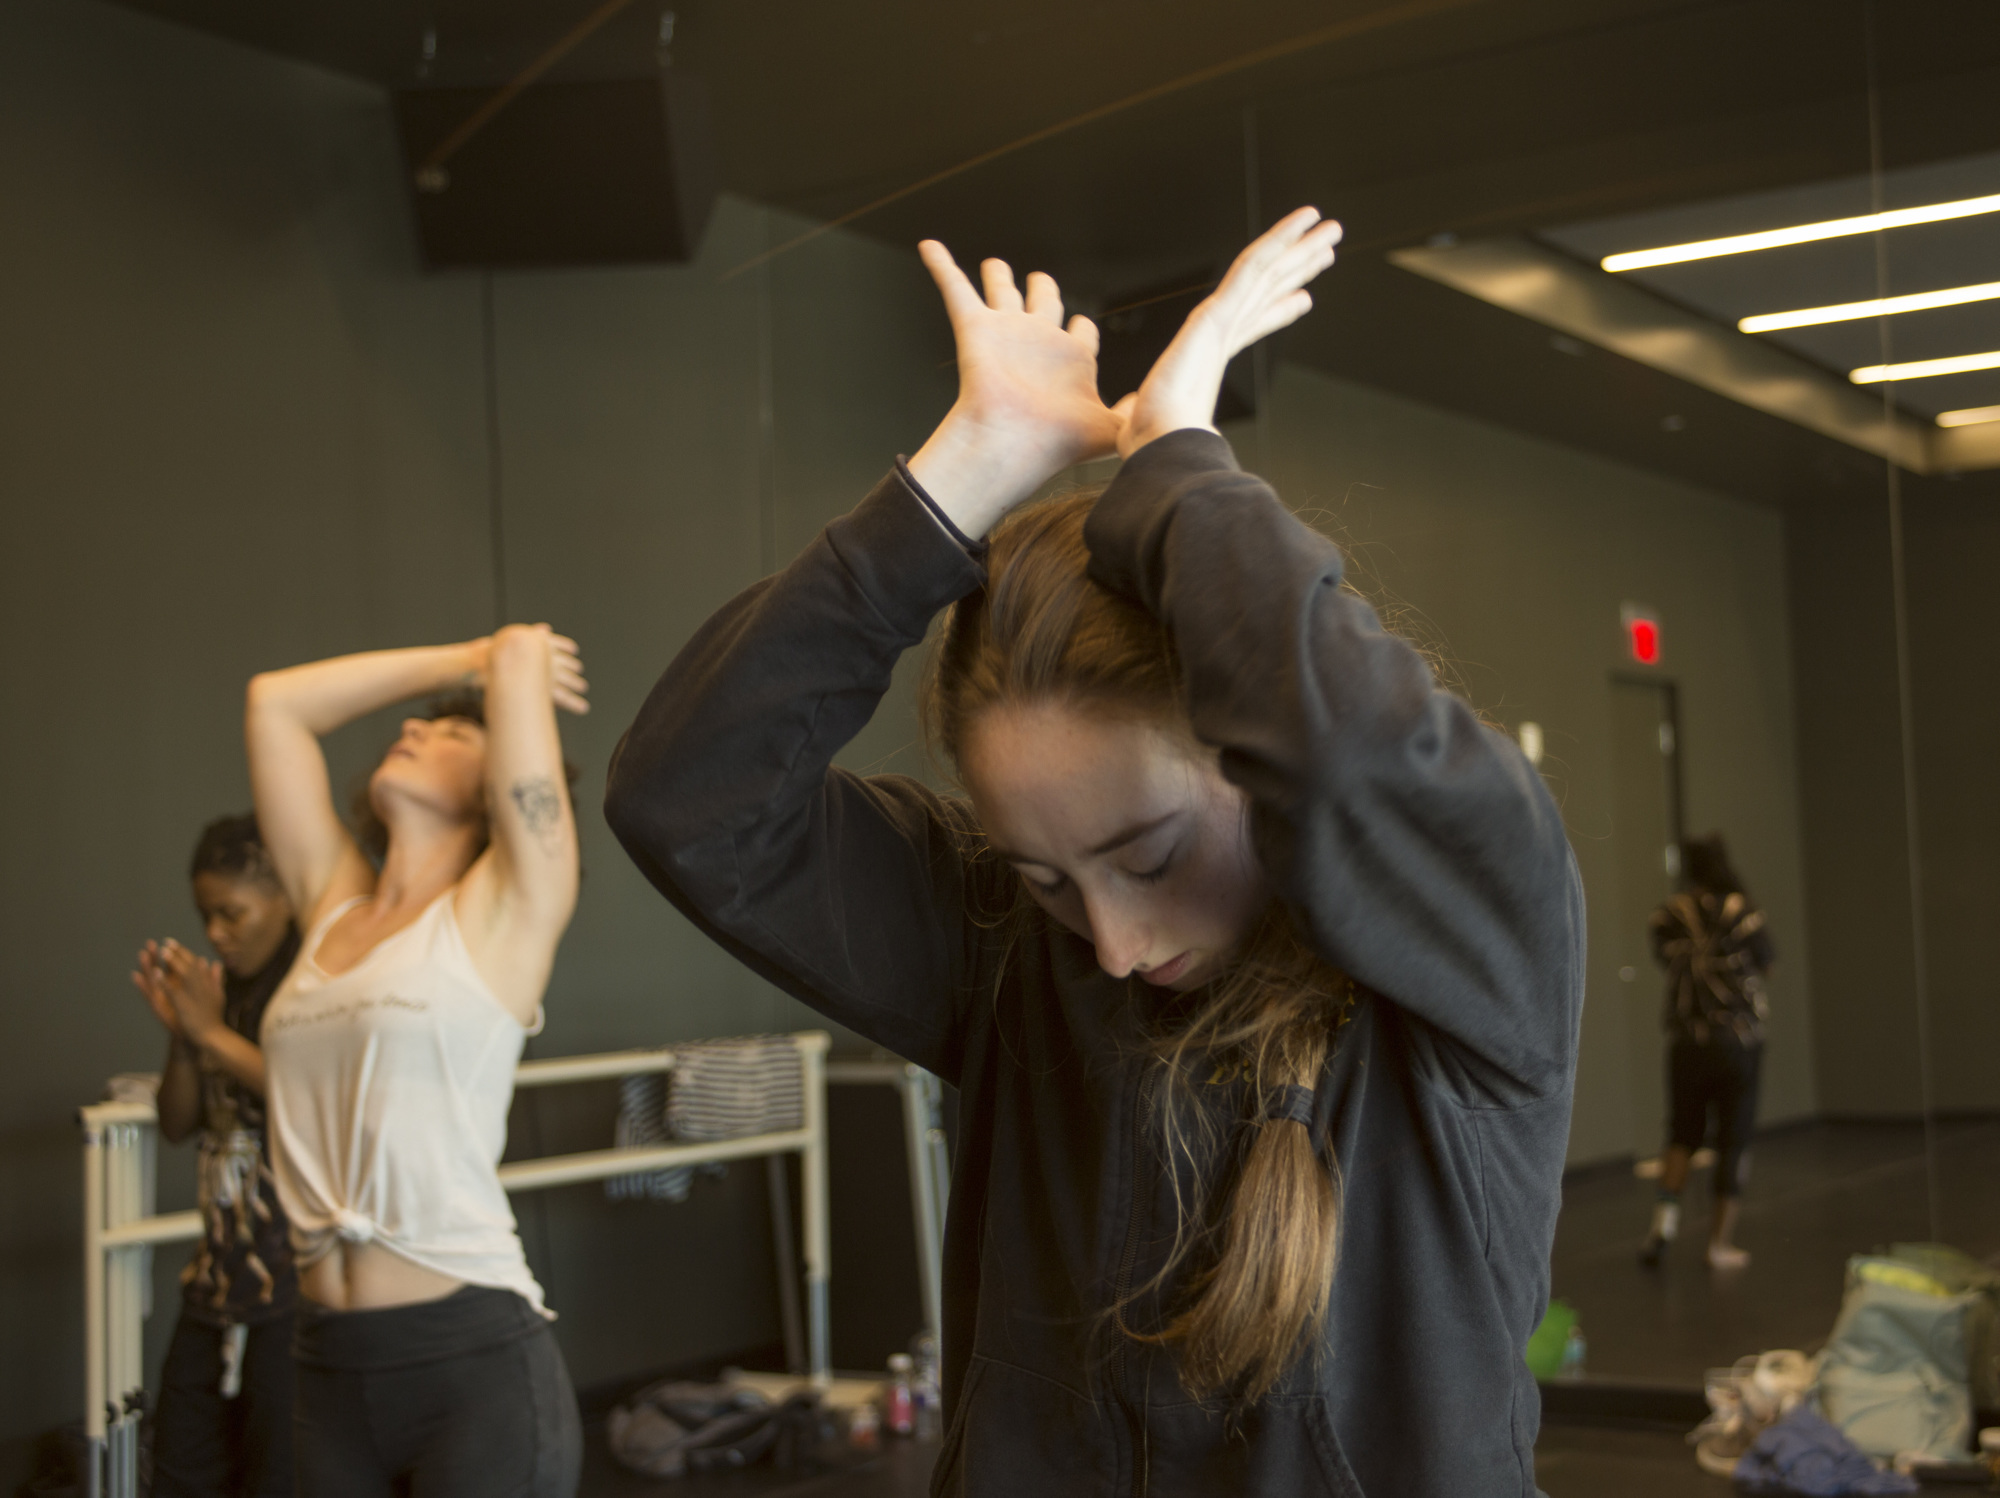 Moving Ethos Dance moved into the studio inside The Kotler-Coville Glass Pavilion this fall, and the residency continues through spring 2019. File photo